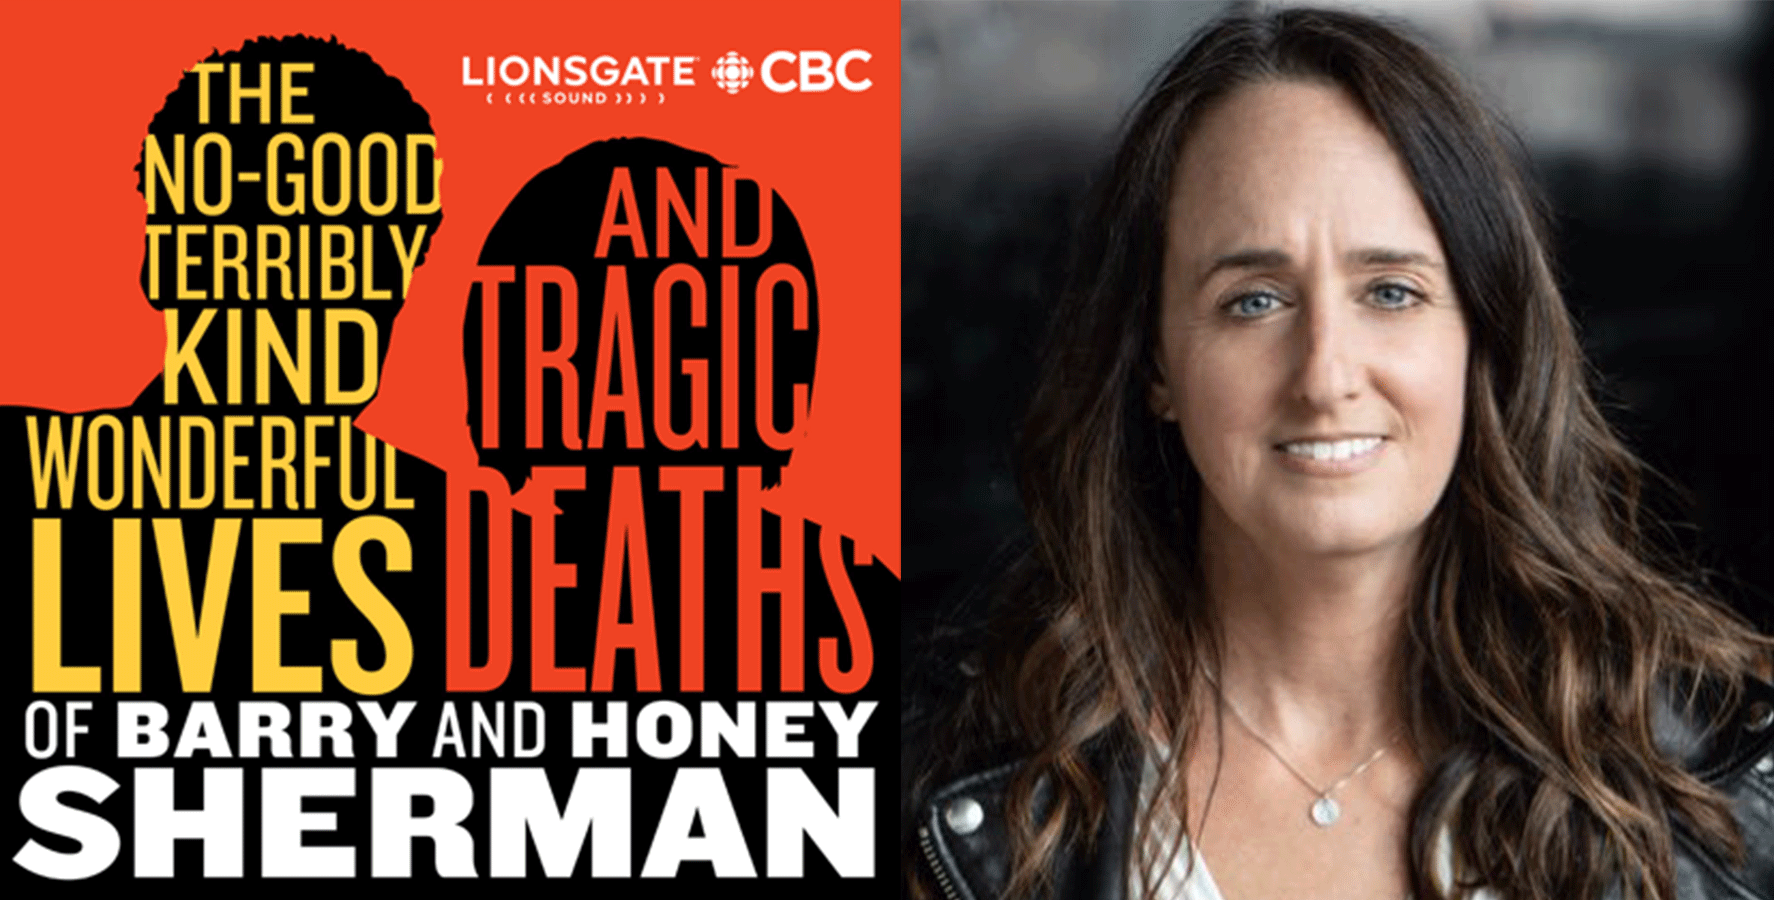 The No-Good, Terribly Kind, Wonderful Lives and Tragic Deaths of Barry and Honey Sherman podcast cover and Kathleen Goldhar.